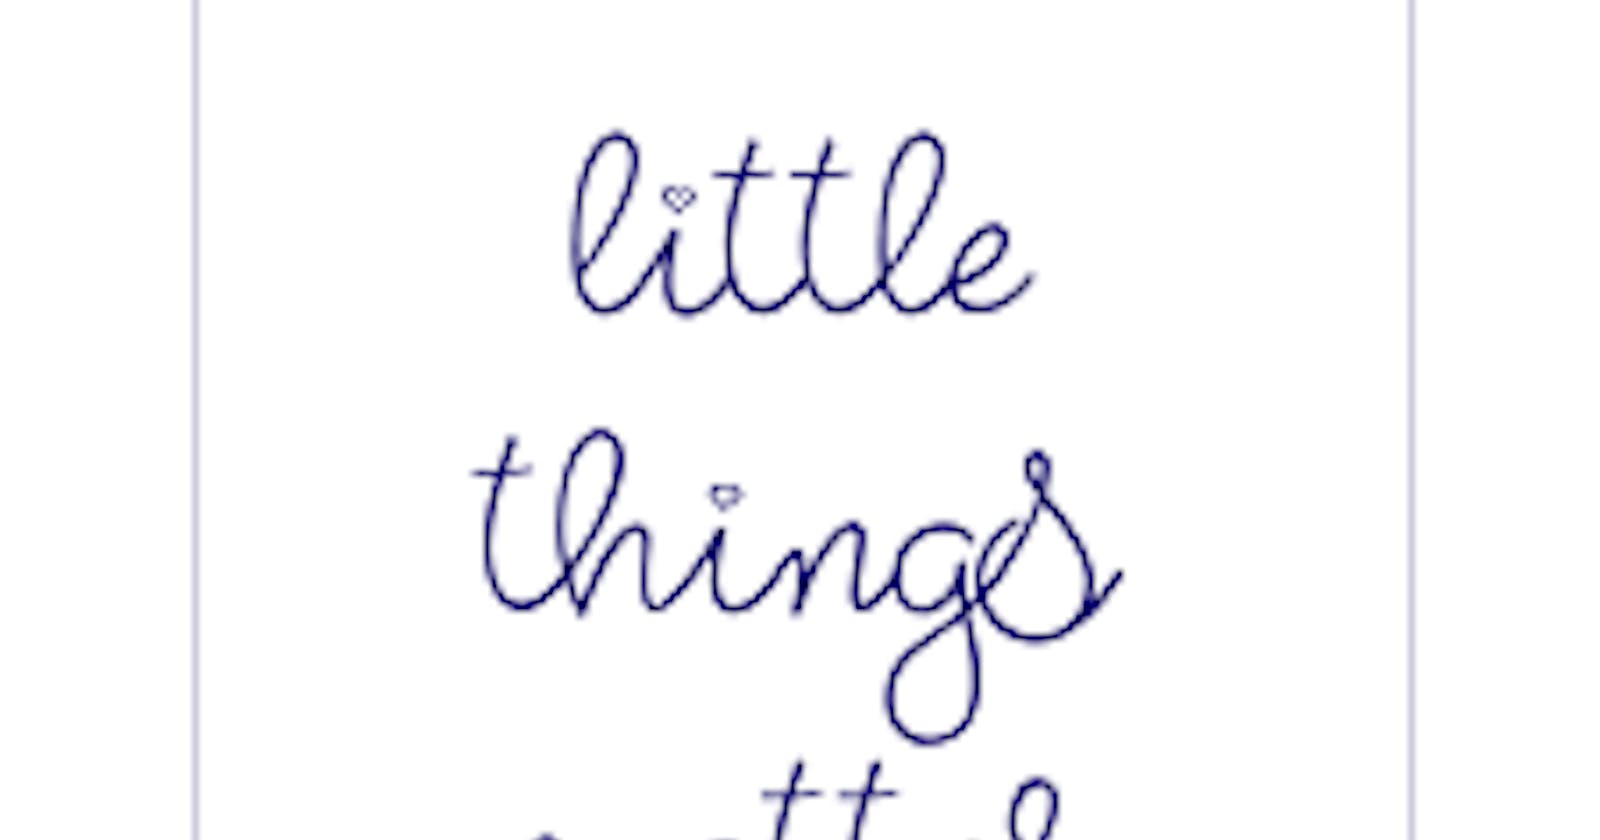 Day 3:Little things matter